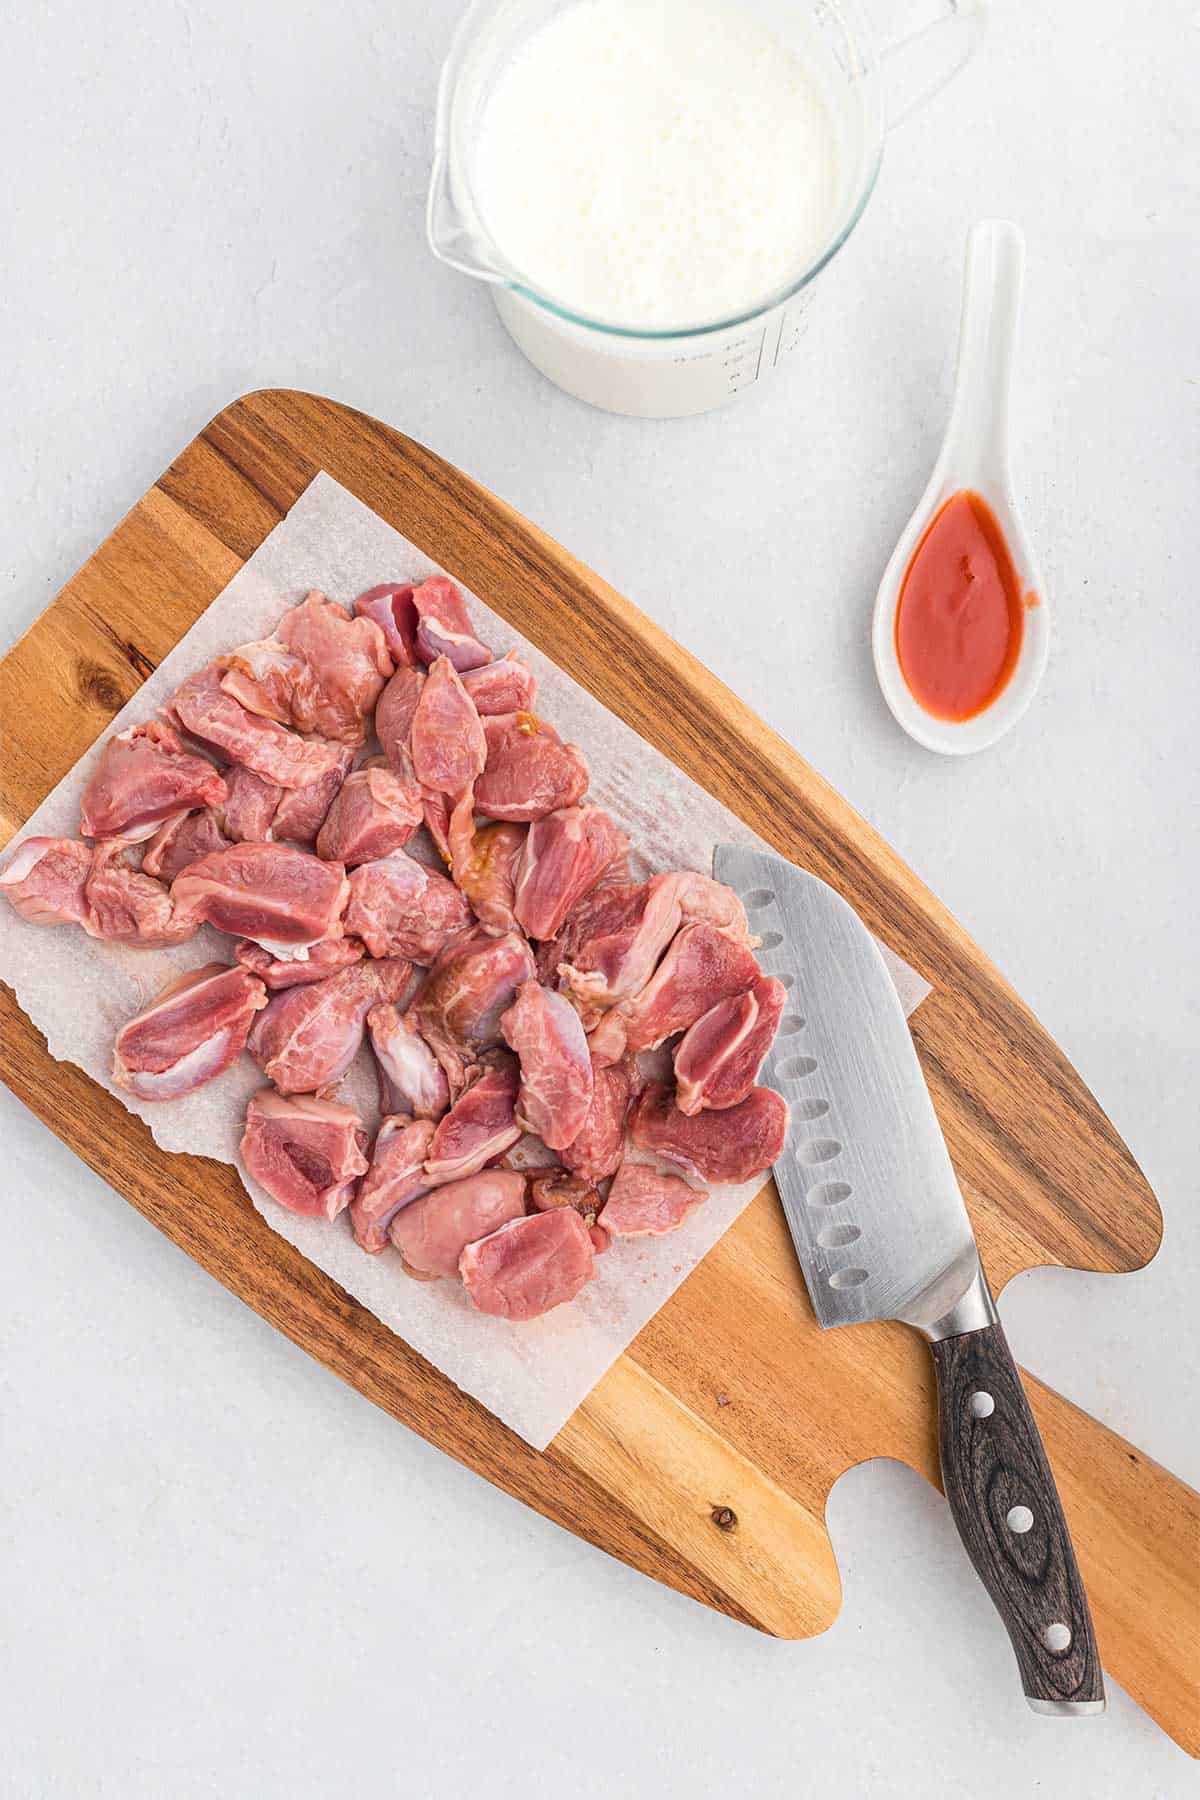 Trimmed chicken gizzards on a cutting board with a knife.